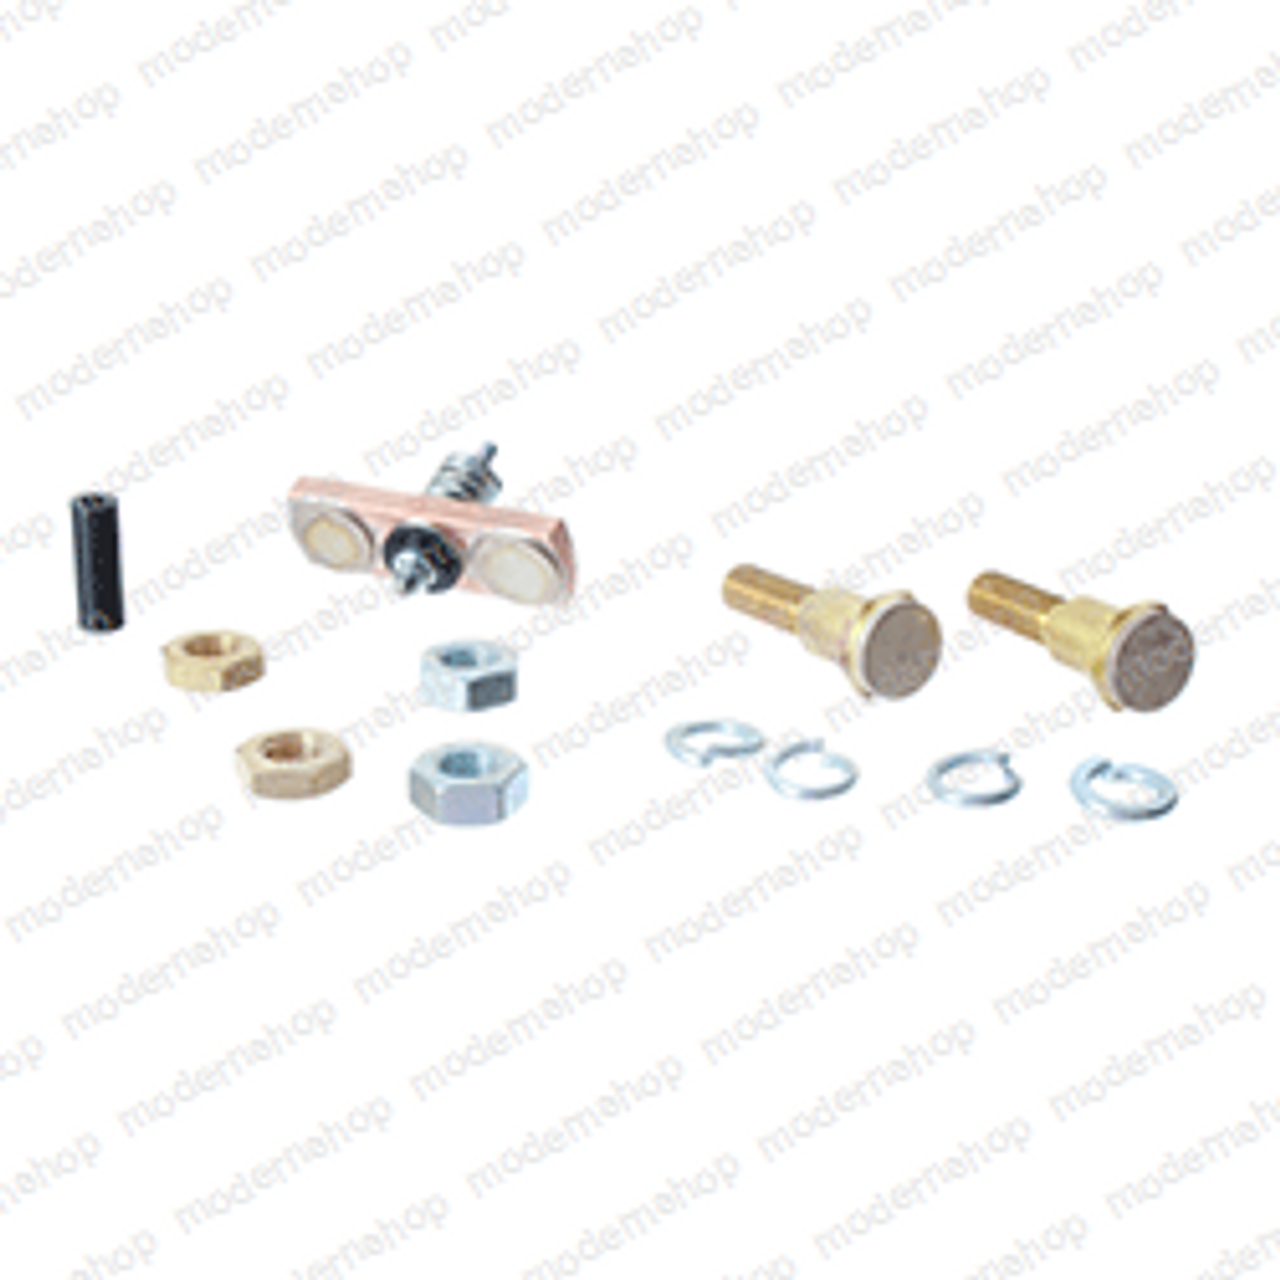 2155-94: Albright TIP KIT - CONTACT